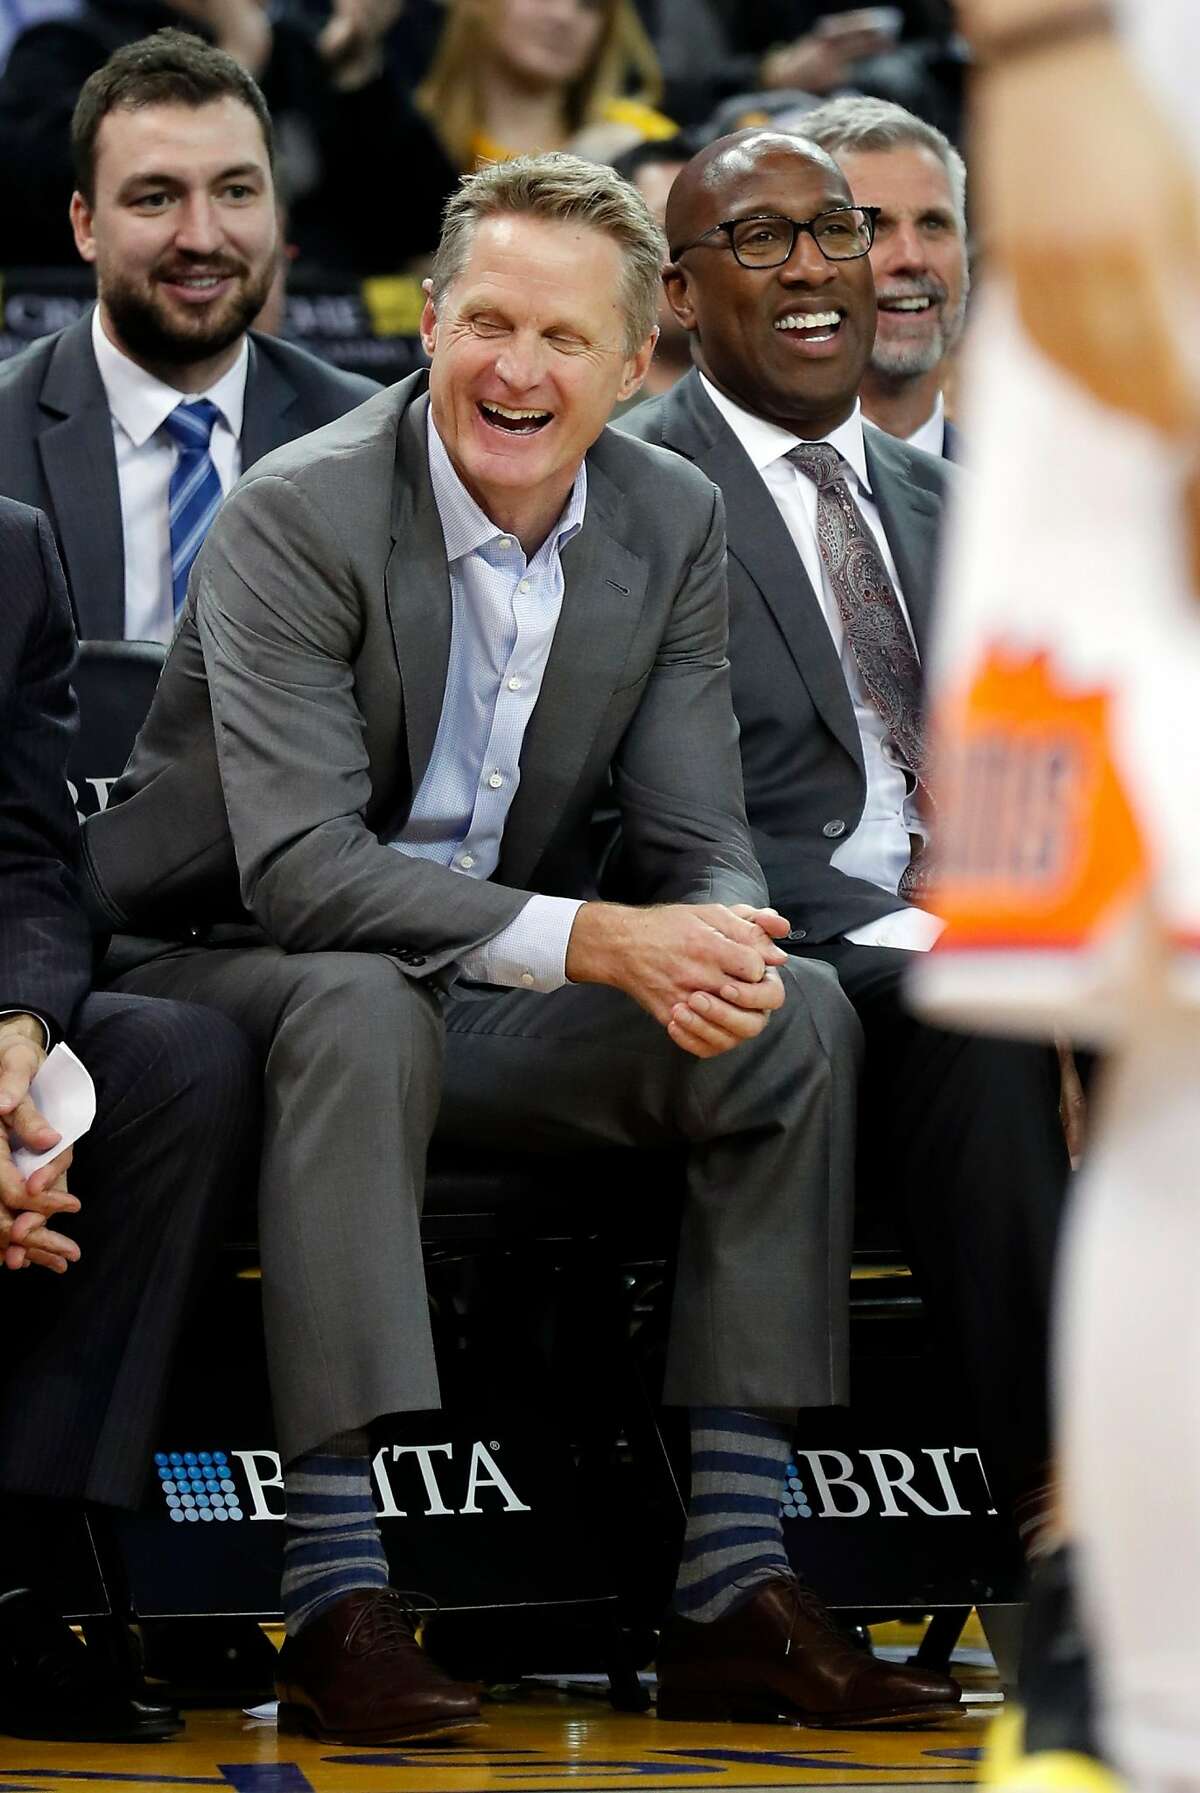 (left to right) Golden State Warriors' coaches' Chris DeMarco, Steve Kerr, Mike Brown and Bruce Fraser enjoy the 3rd quarter of Warriors' 129-83 win over Phoenix Suns during NBA game at Oracle Arena in Oakland, Calif., on Monday, February 12, 2018.